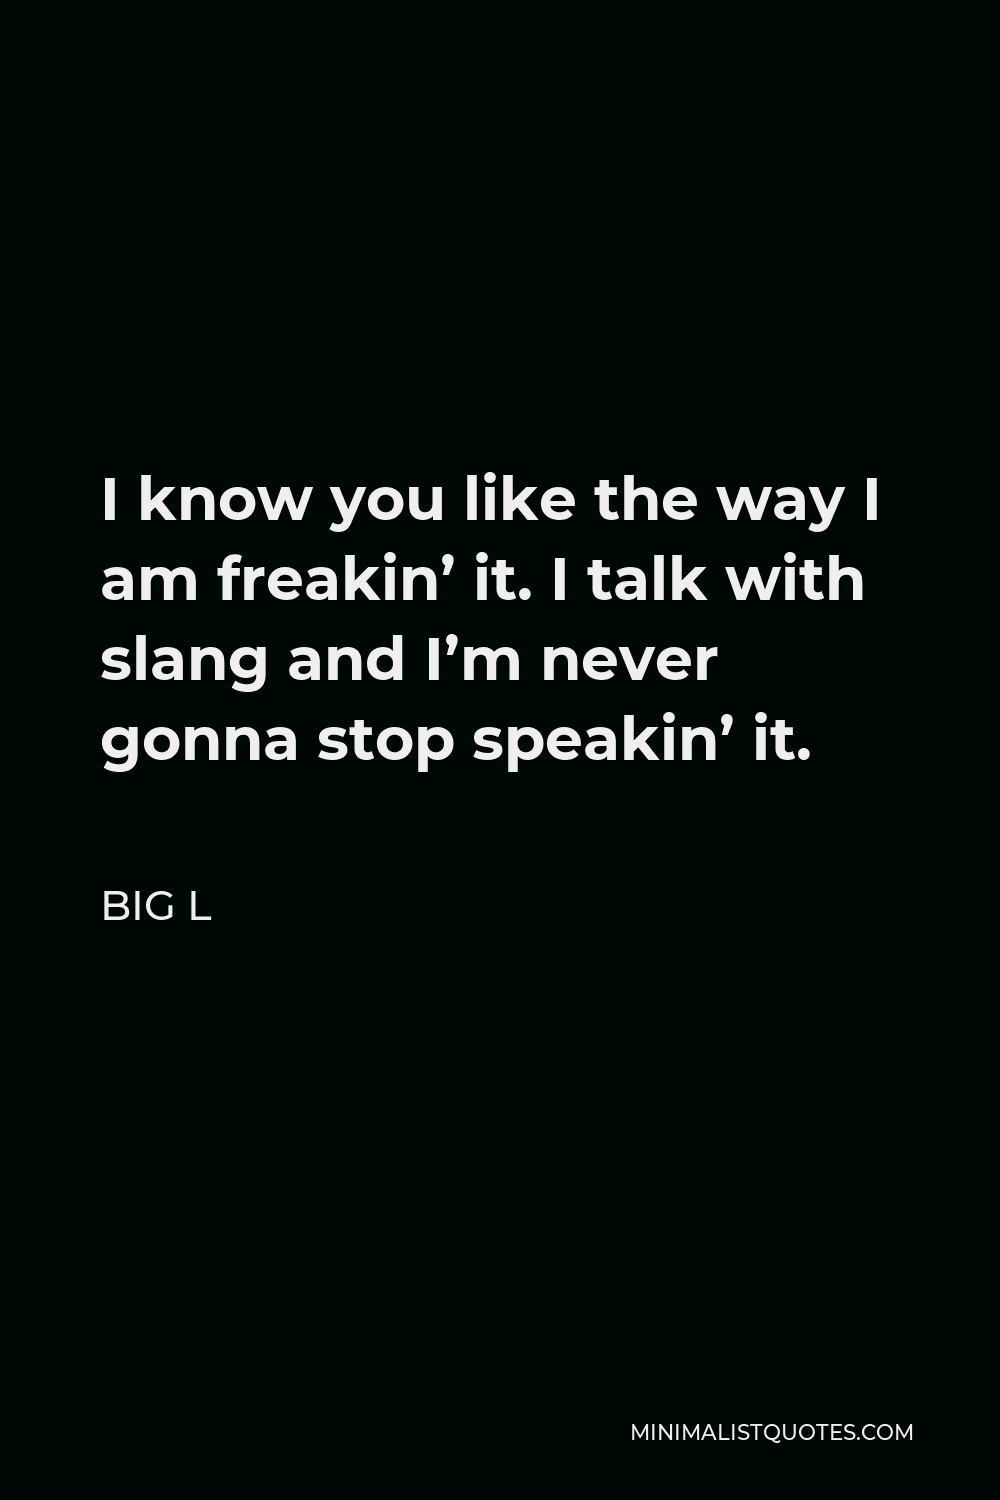 Big L Quote - I know you like the way I am freakin’ it. I talk with slang and I’m never gonna stop speakin’ it.